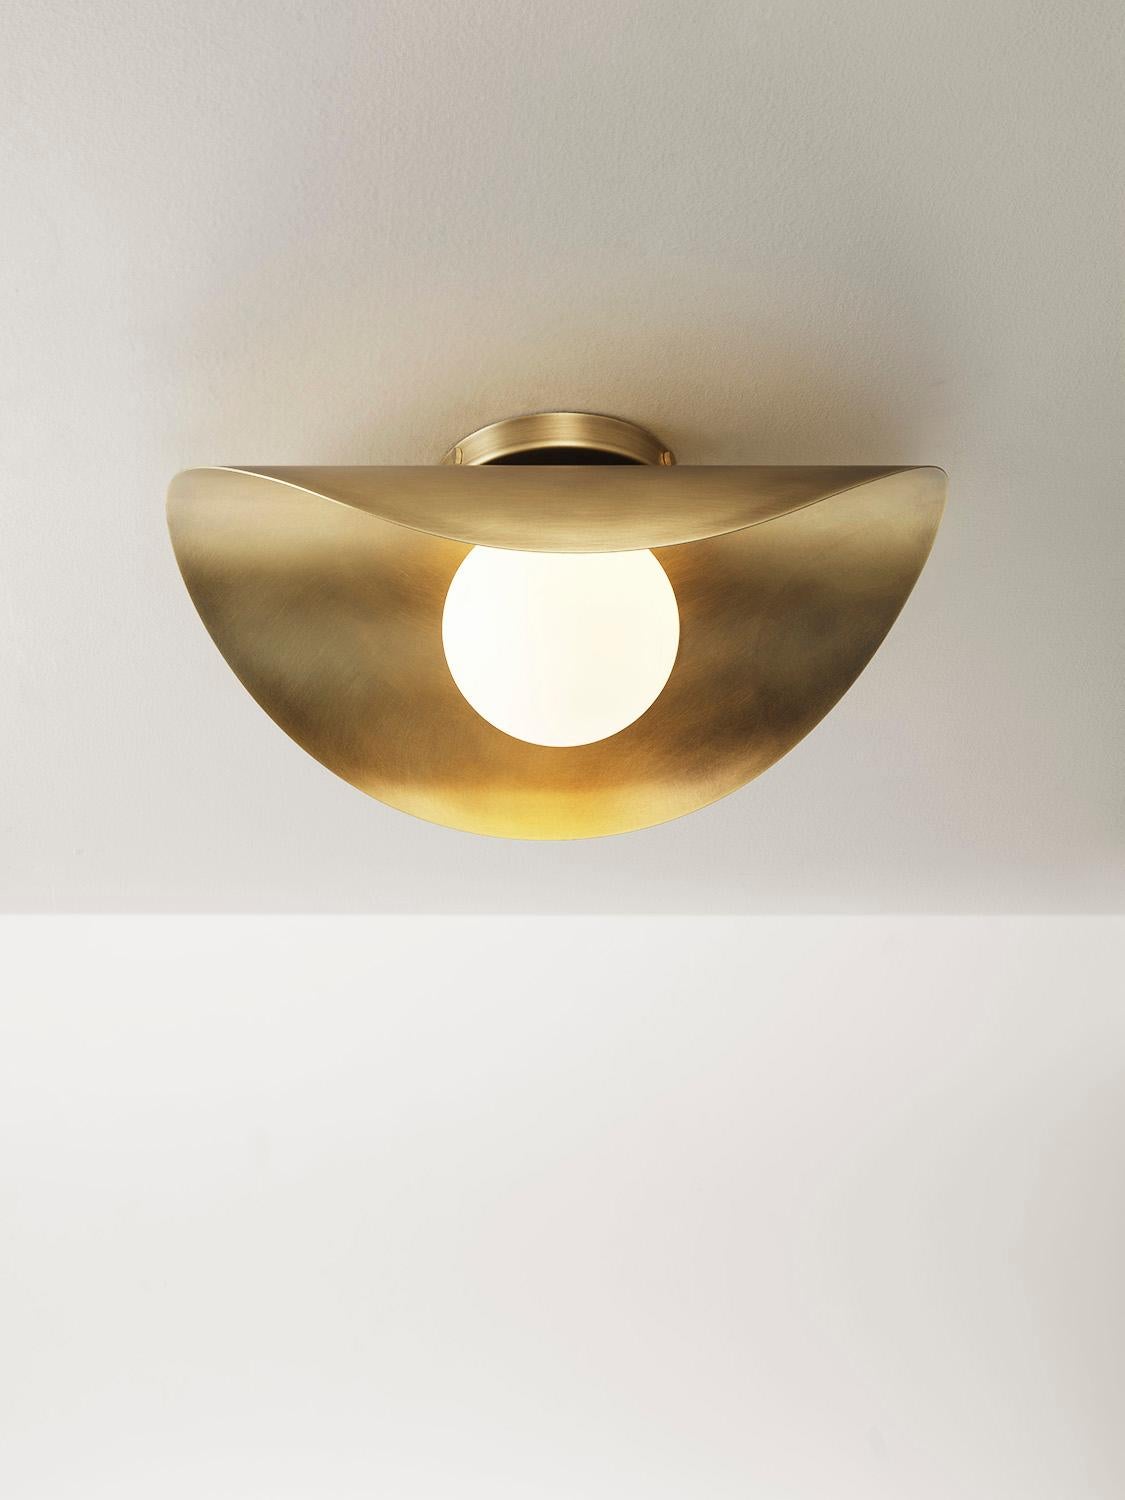 Introducing the Montera Flushmount, a sleek and versatile addition to our collection. Unlike its pendant counterpart, this fixture foregoes the drop rod for a seamless integration into ceilings or walls. Its undulating, biomorphic form casts a soft,